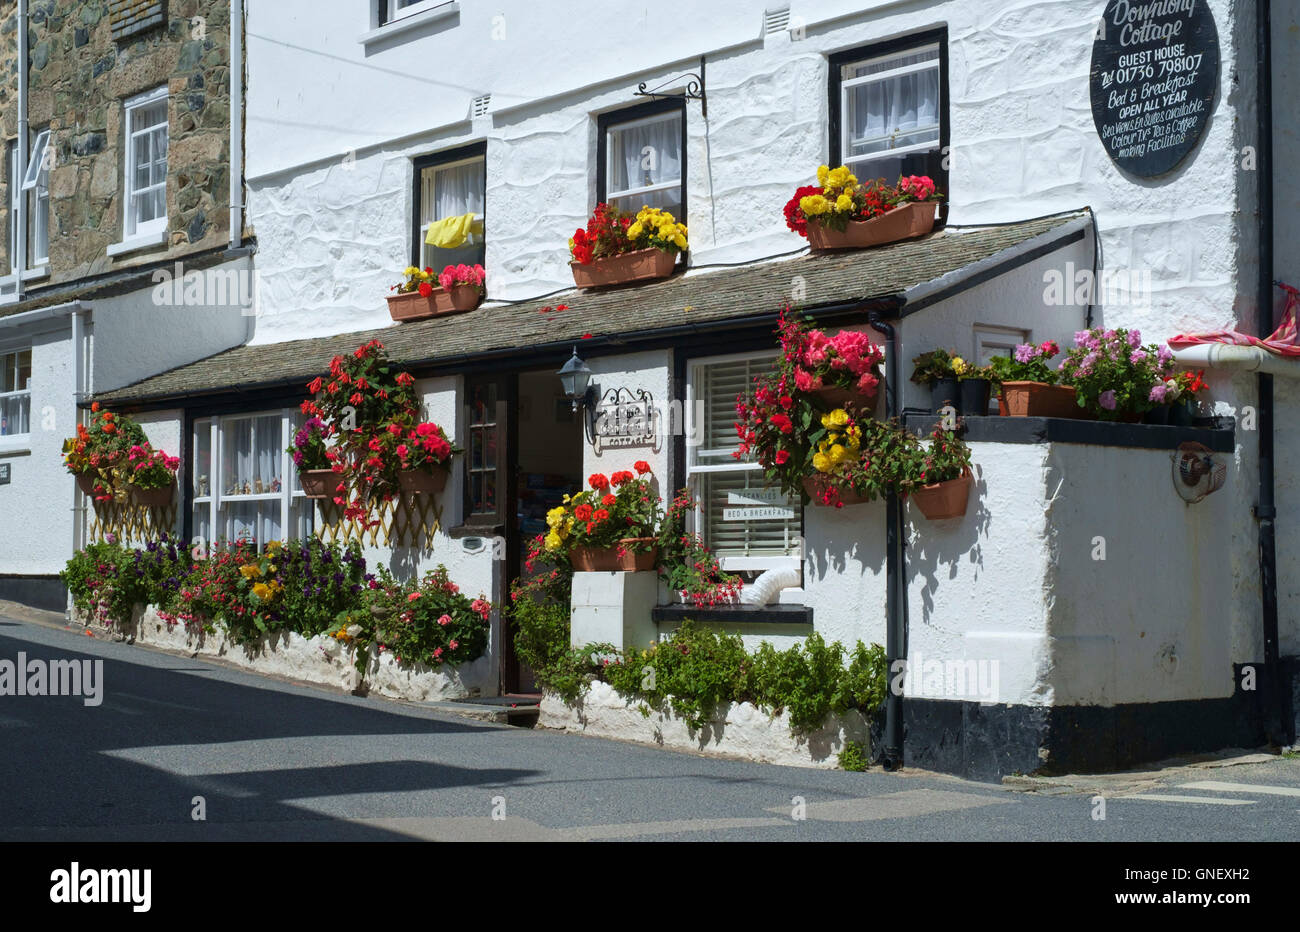 St Ives a seaside town in Cornwall England UK Downalong cottage bed and breakfast b&B Stock Photo